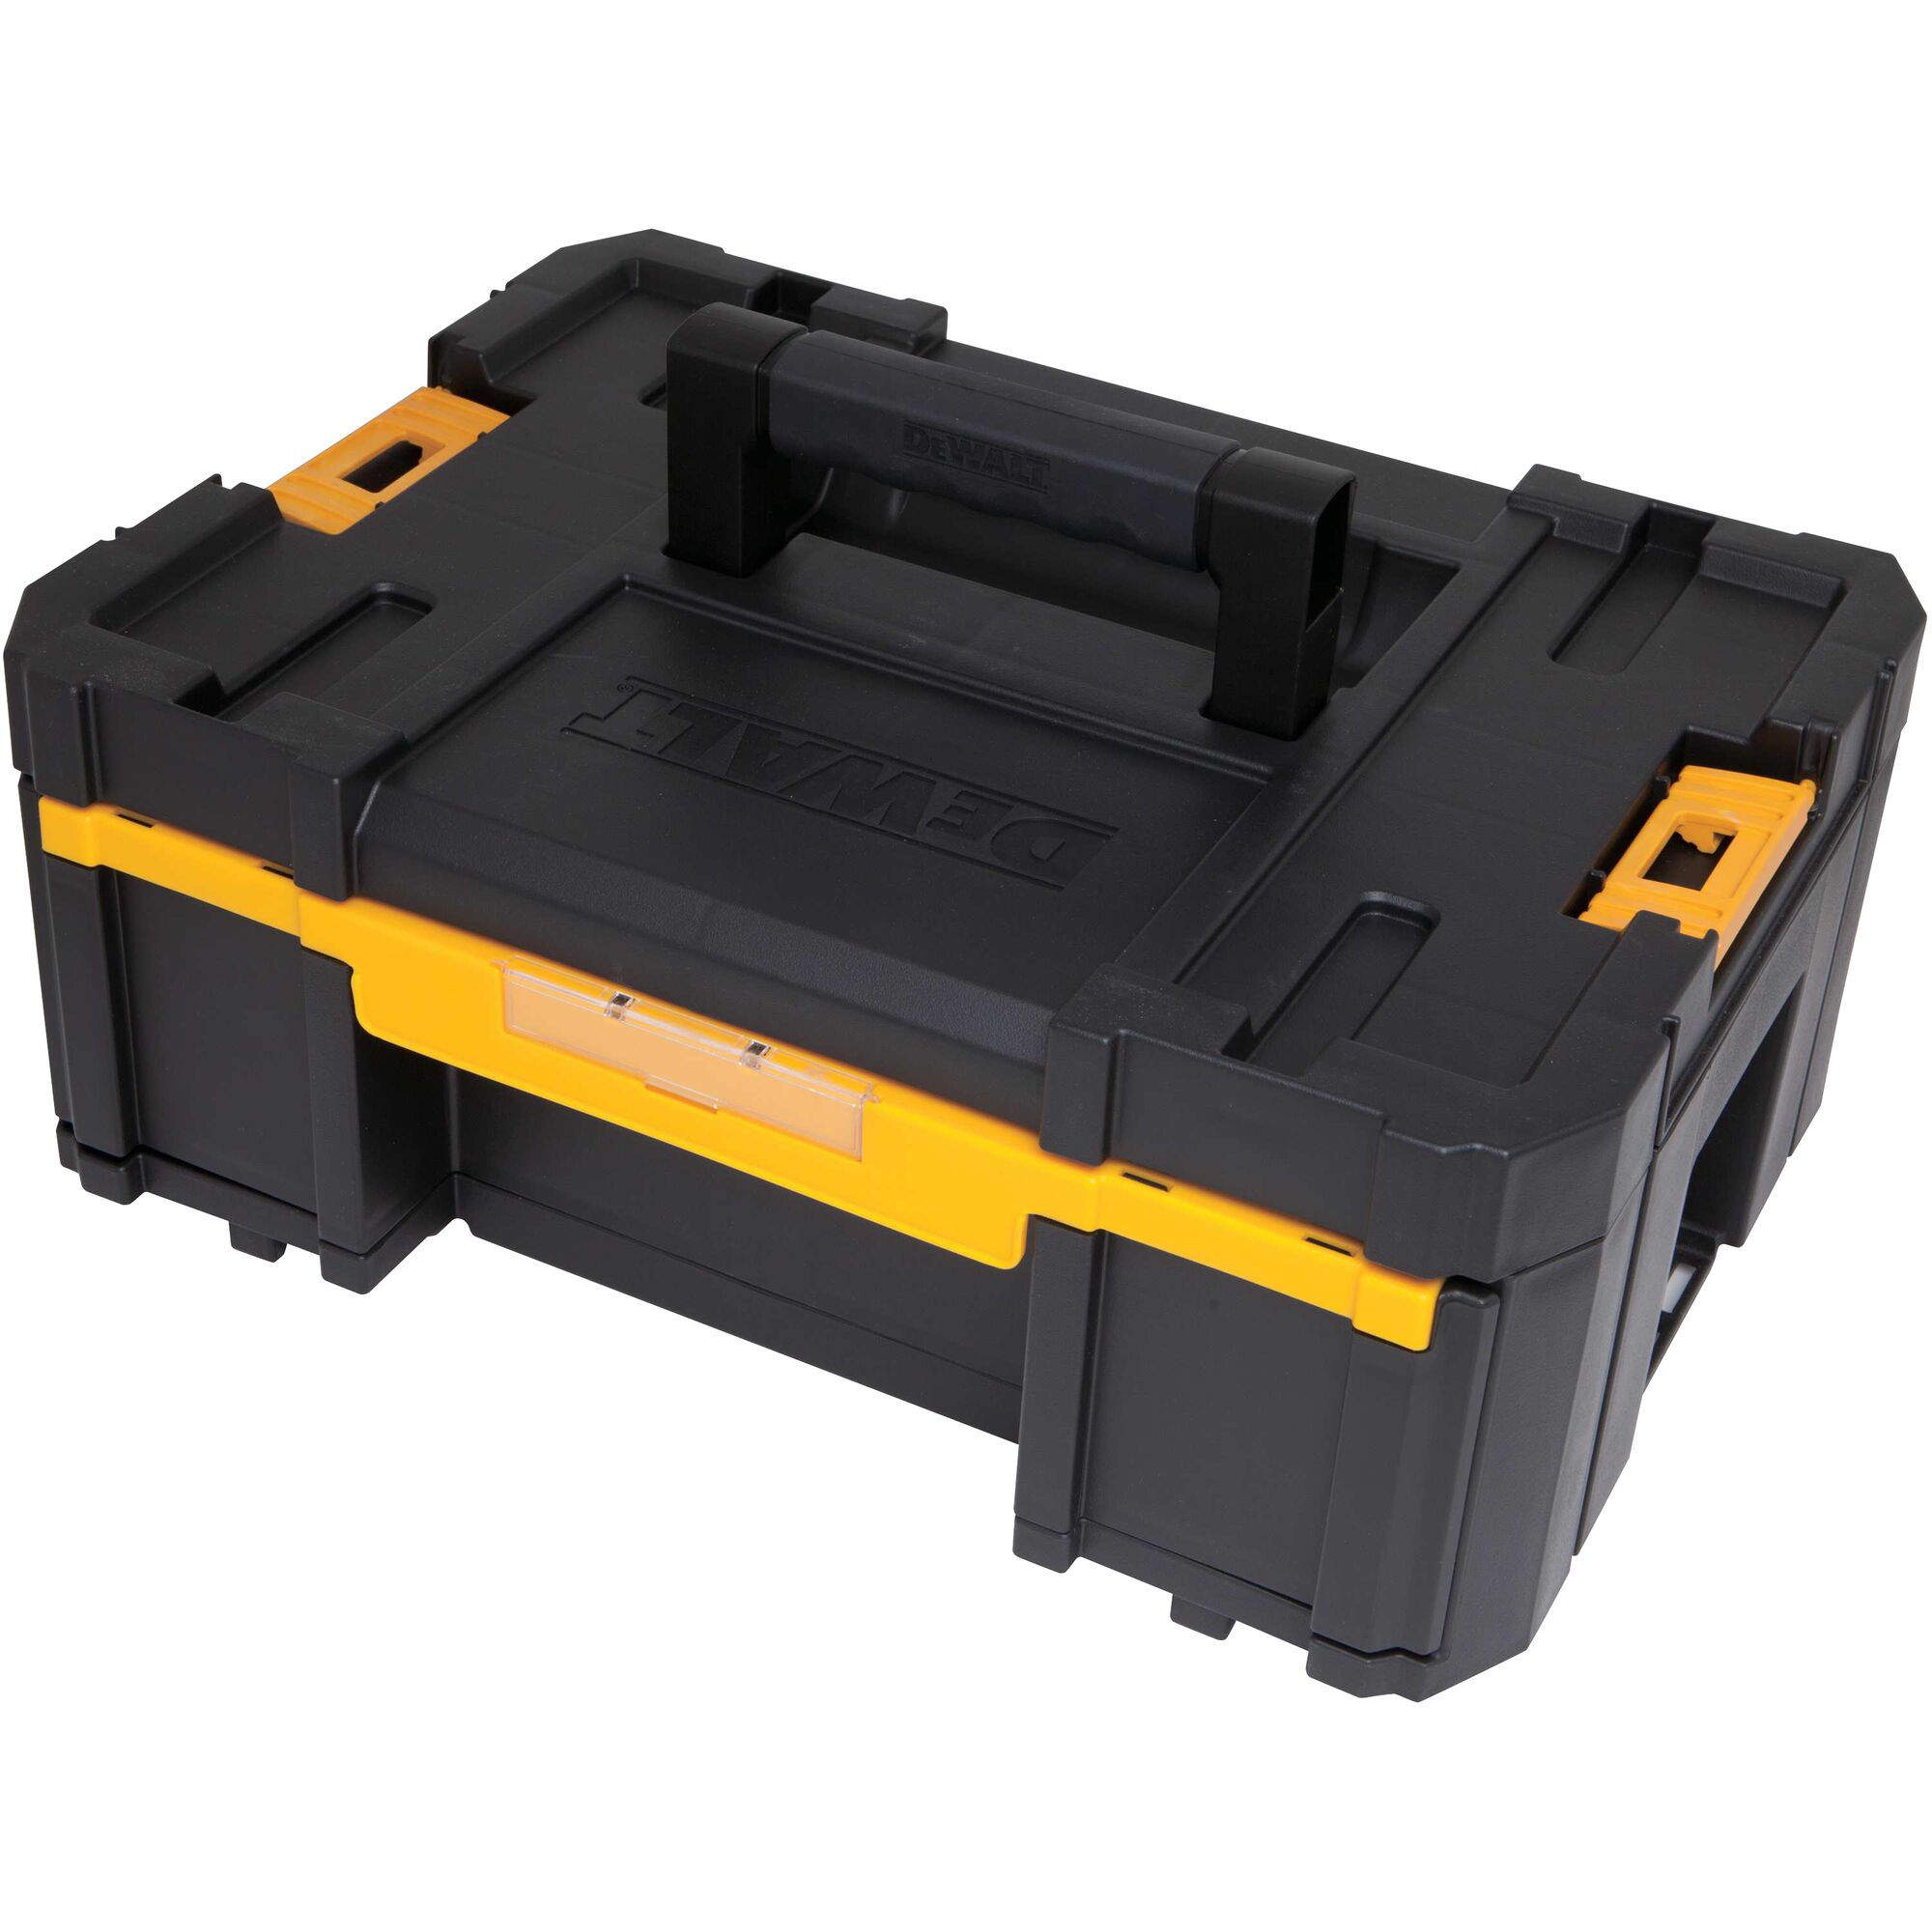 Stackable Deep Storage Box Portable Heavy Duty Tool Organizer Details about   Tstak Vi 17 in 